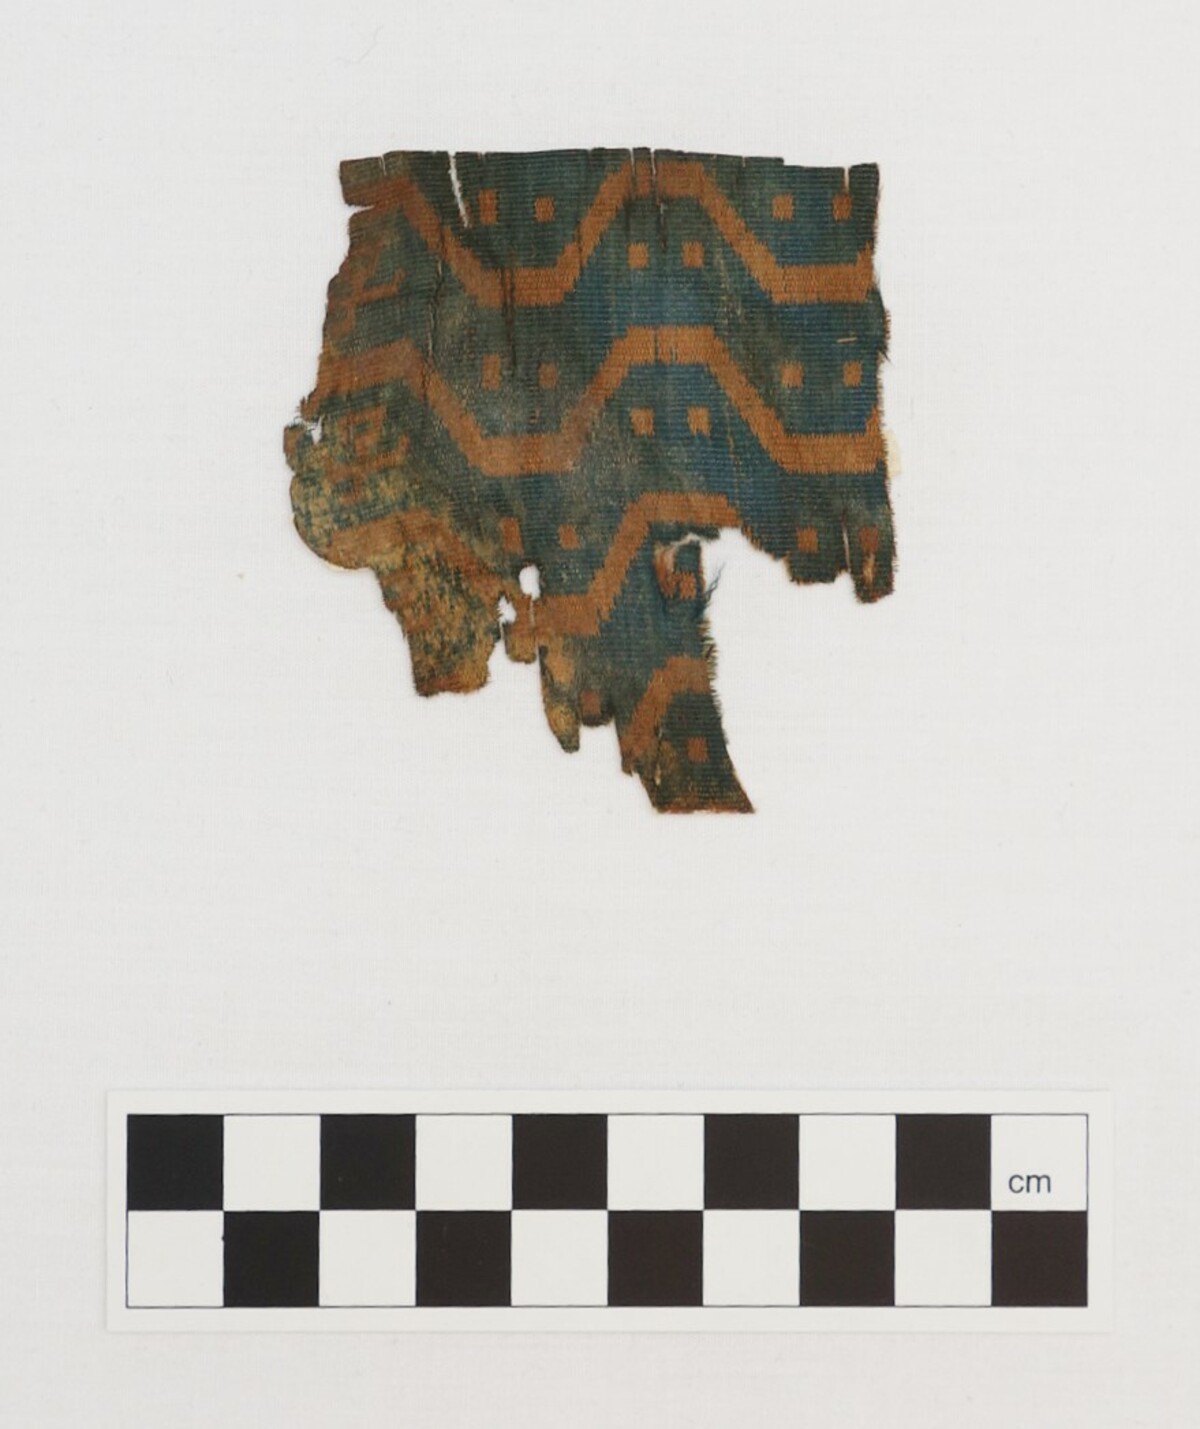 Fragment of warp-faced compound weave silk cloth from the site of Niya in western China, 2nd century AD (TRC 2000.0009). Click on the image for more information.